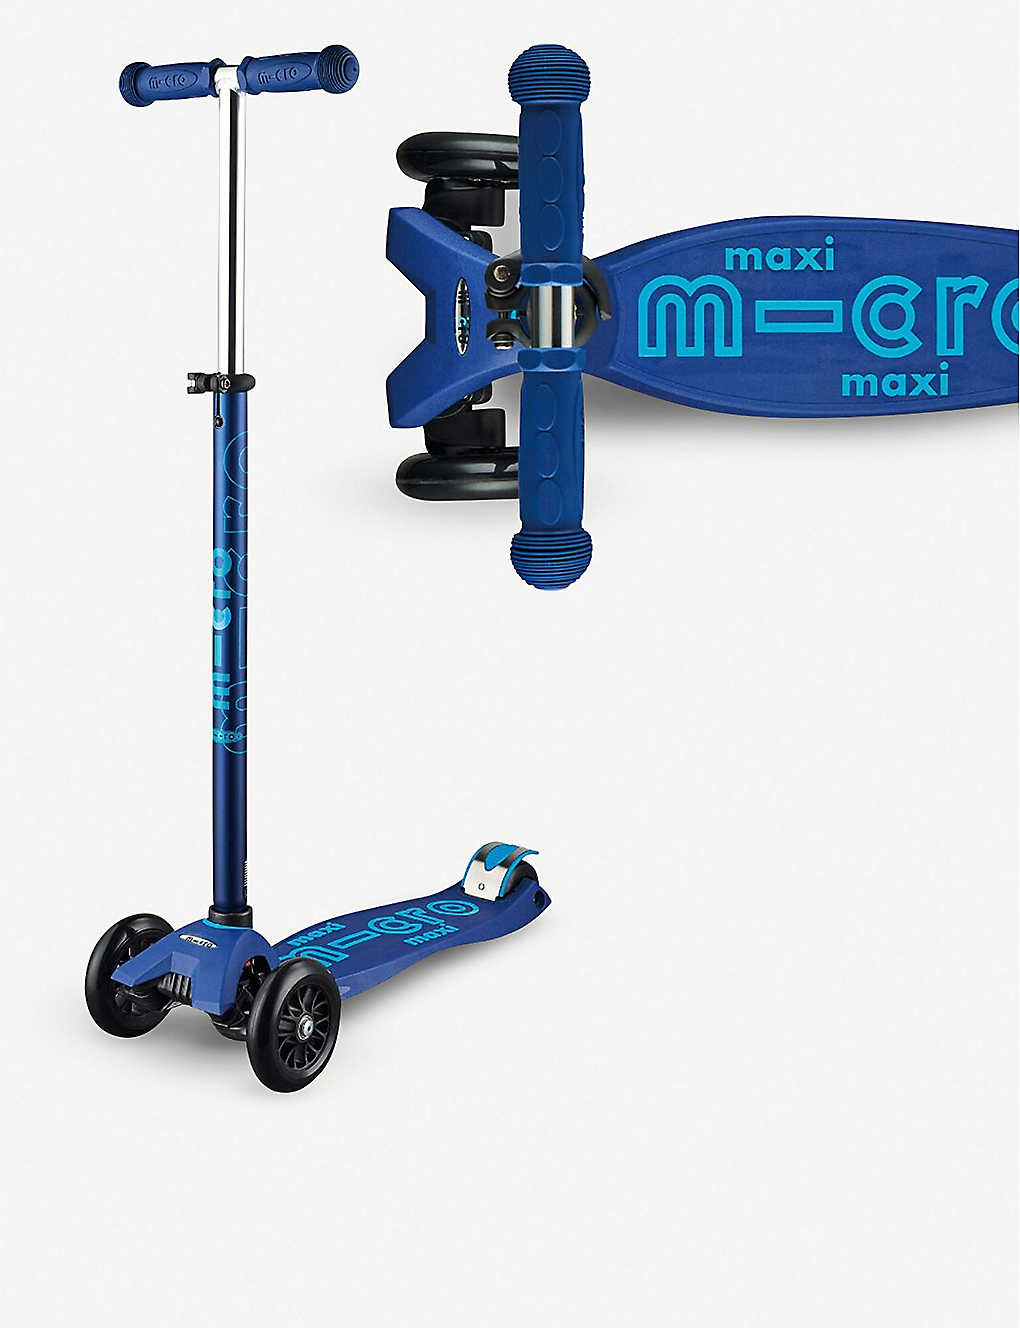 MICRO SCOOTER - Maxi Micro Deluxe scooter | Selfridges.com